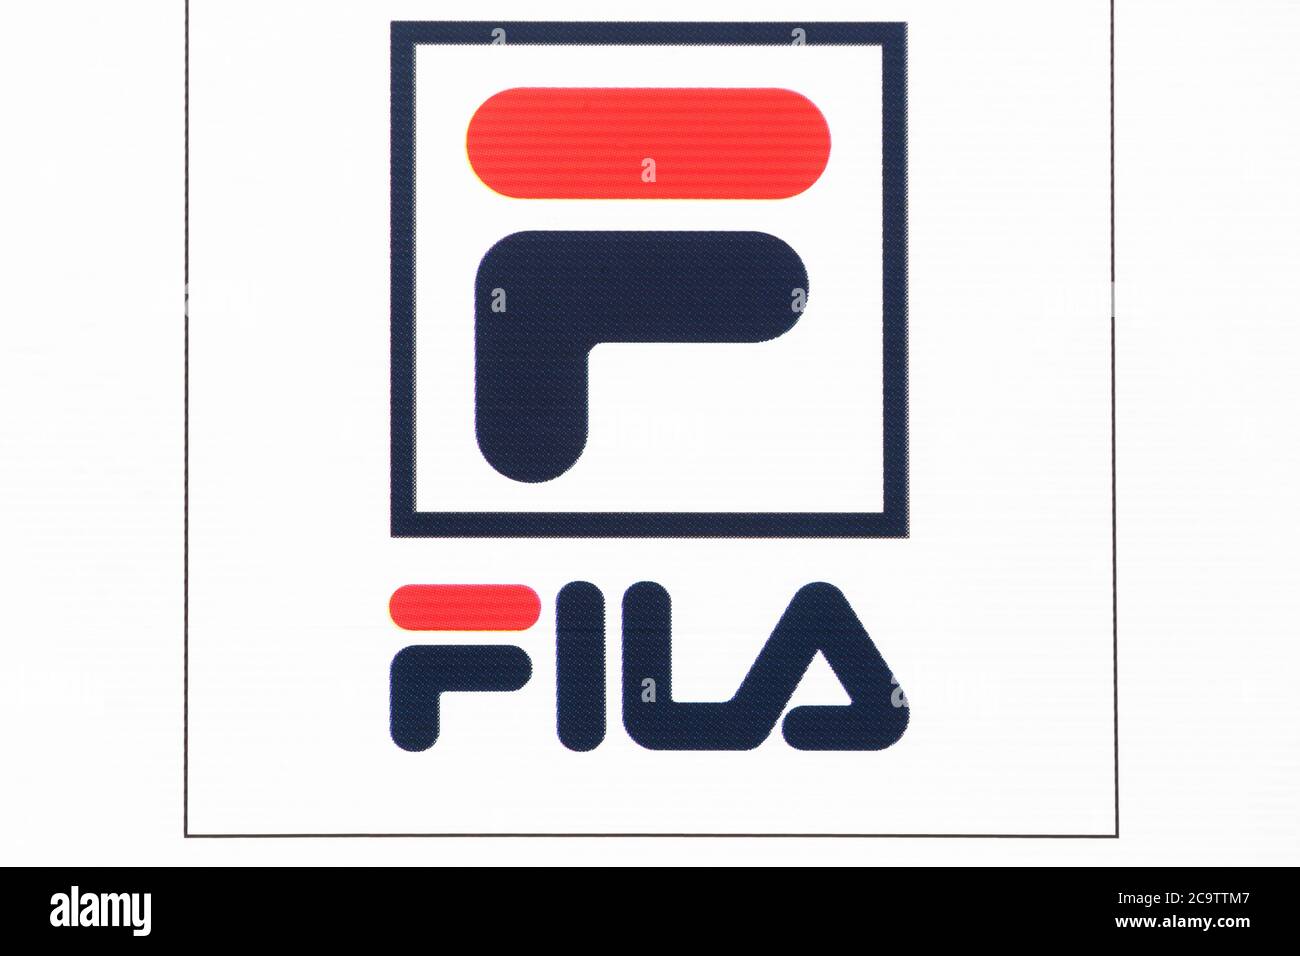 Villefranche, France - March 8, 2020: Fila logo on a wall. Fila is a sportswear manufacturer that designs shoes and apparel Stock Photo -